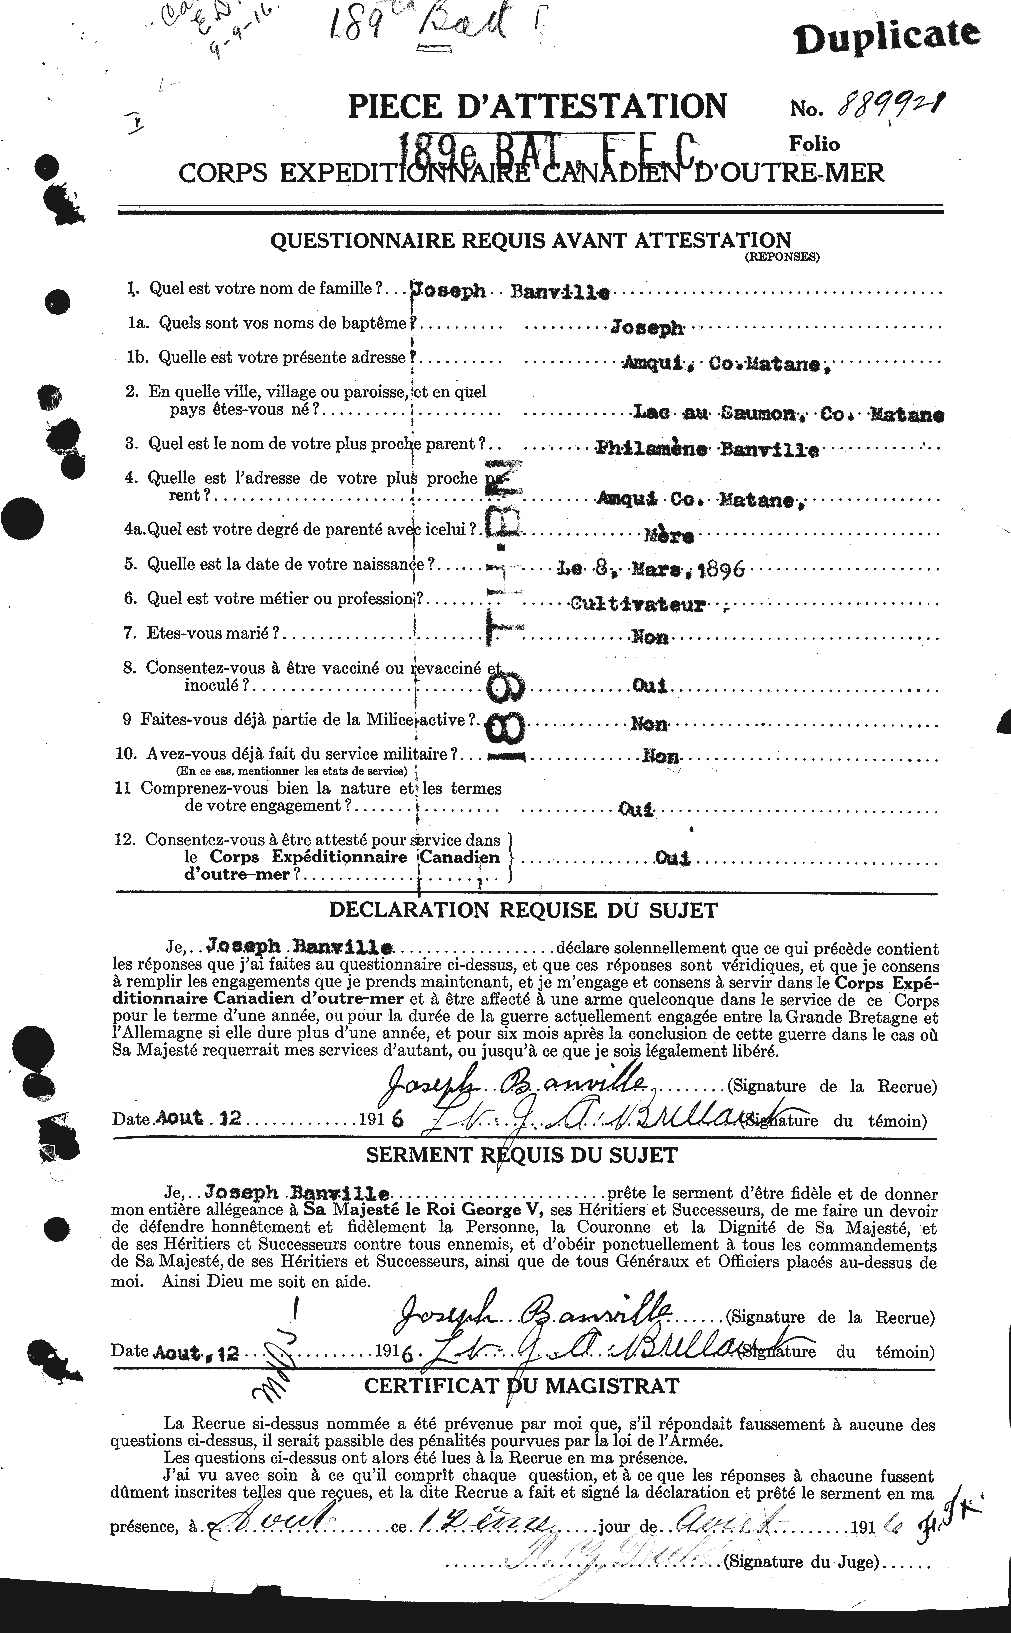 Personnel Records of the First World War - CEF 220580a